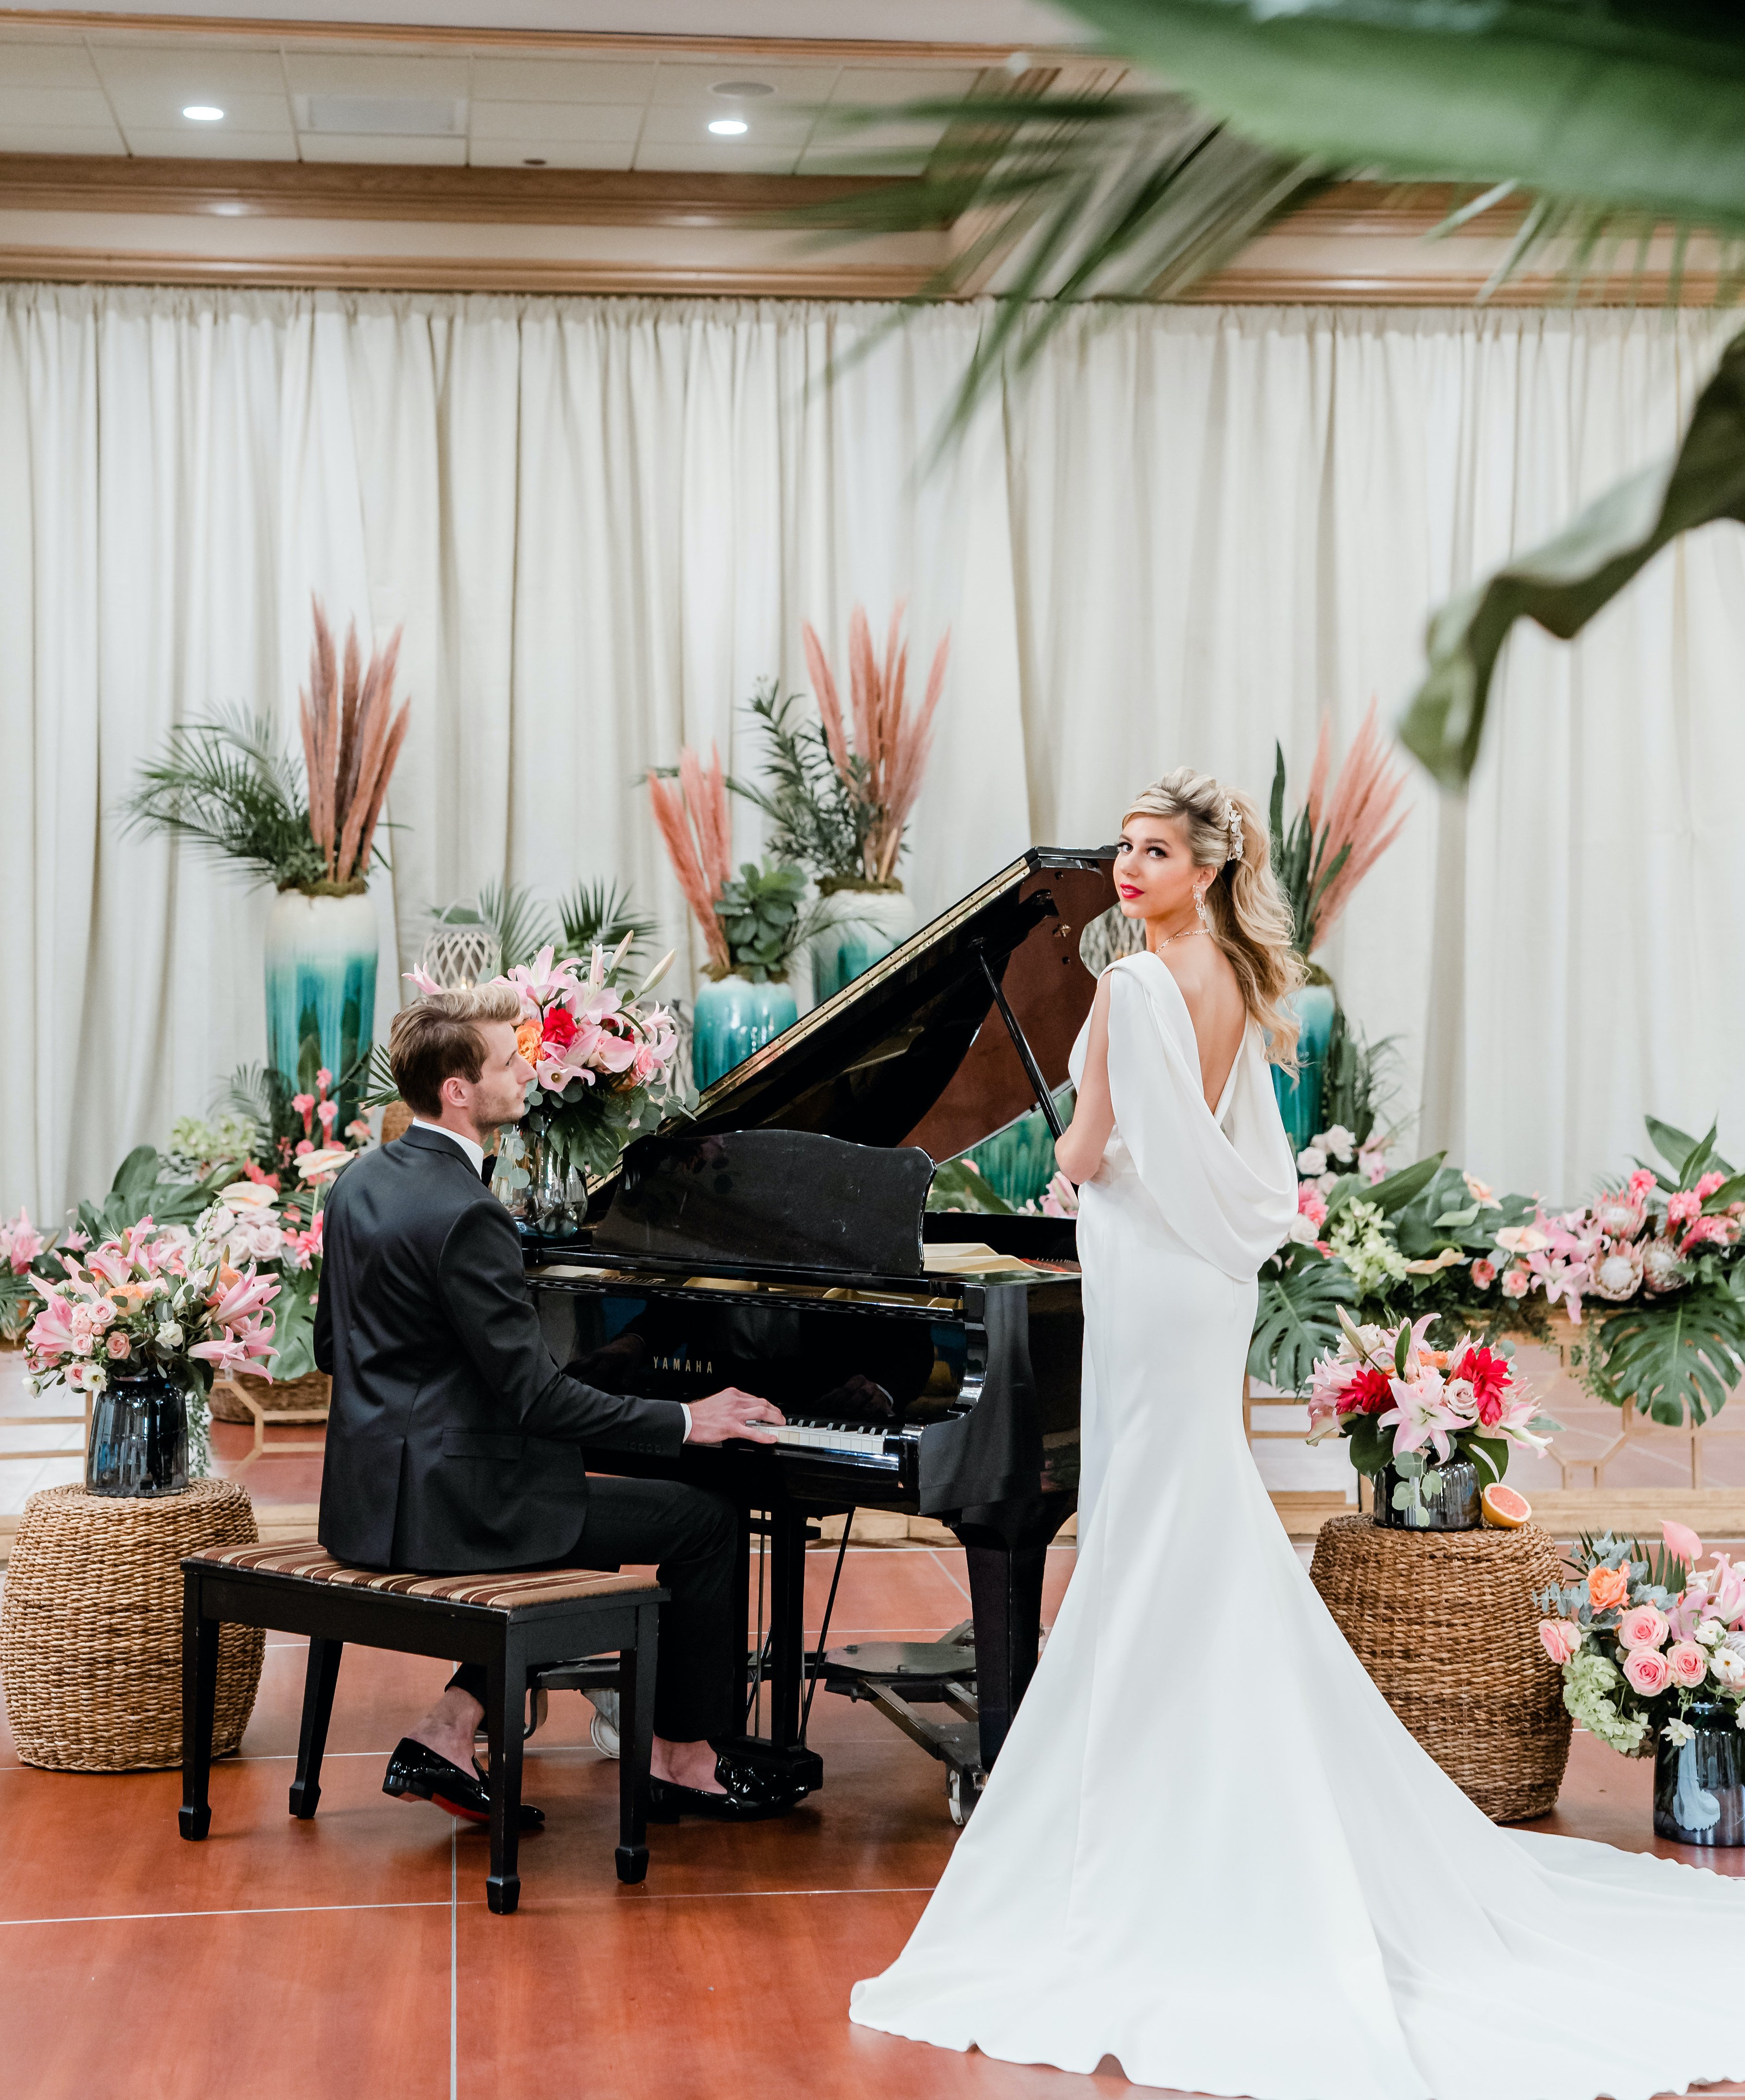 A groom plays the piano while the bride stands next to him and looks at the camera during their tropical wedding reception at The San Luis Resort, Spa & Conference Center.